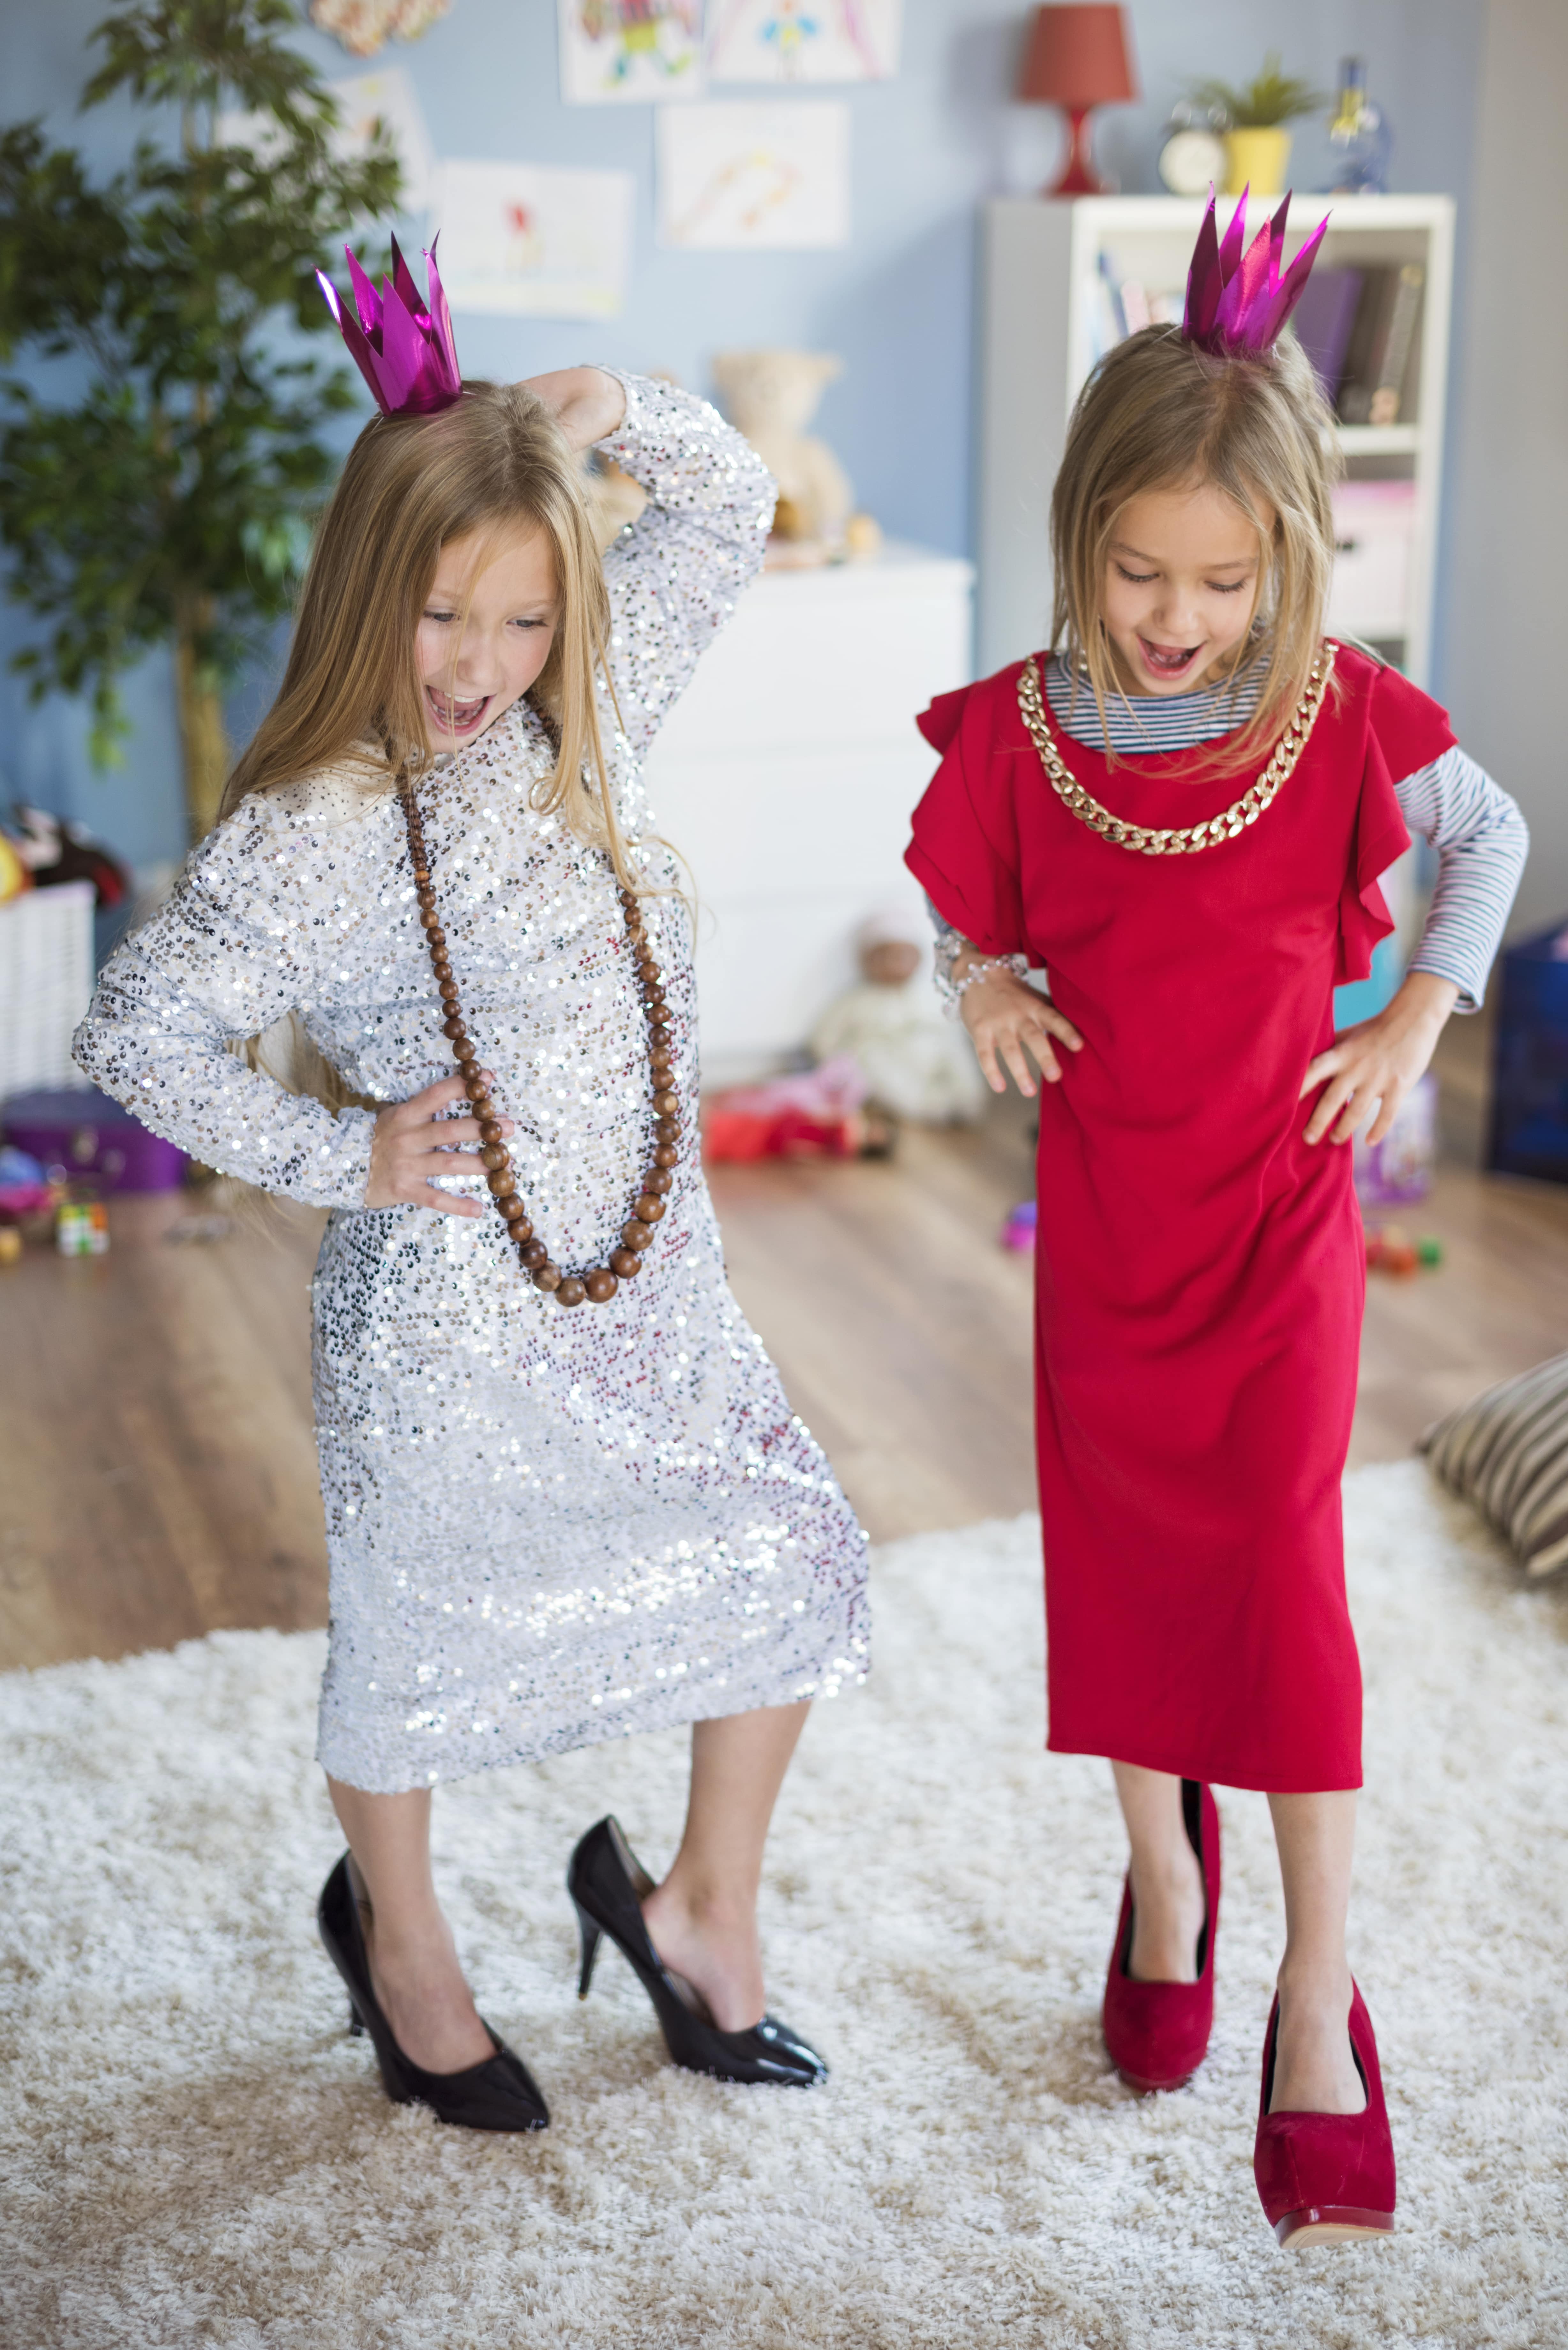 hould I Let My 5-Year-Old Dress Herself